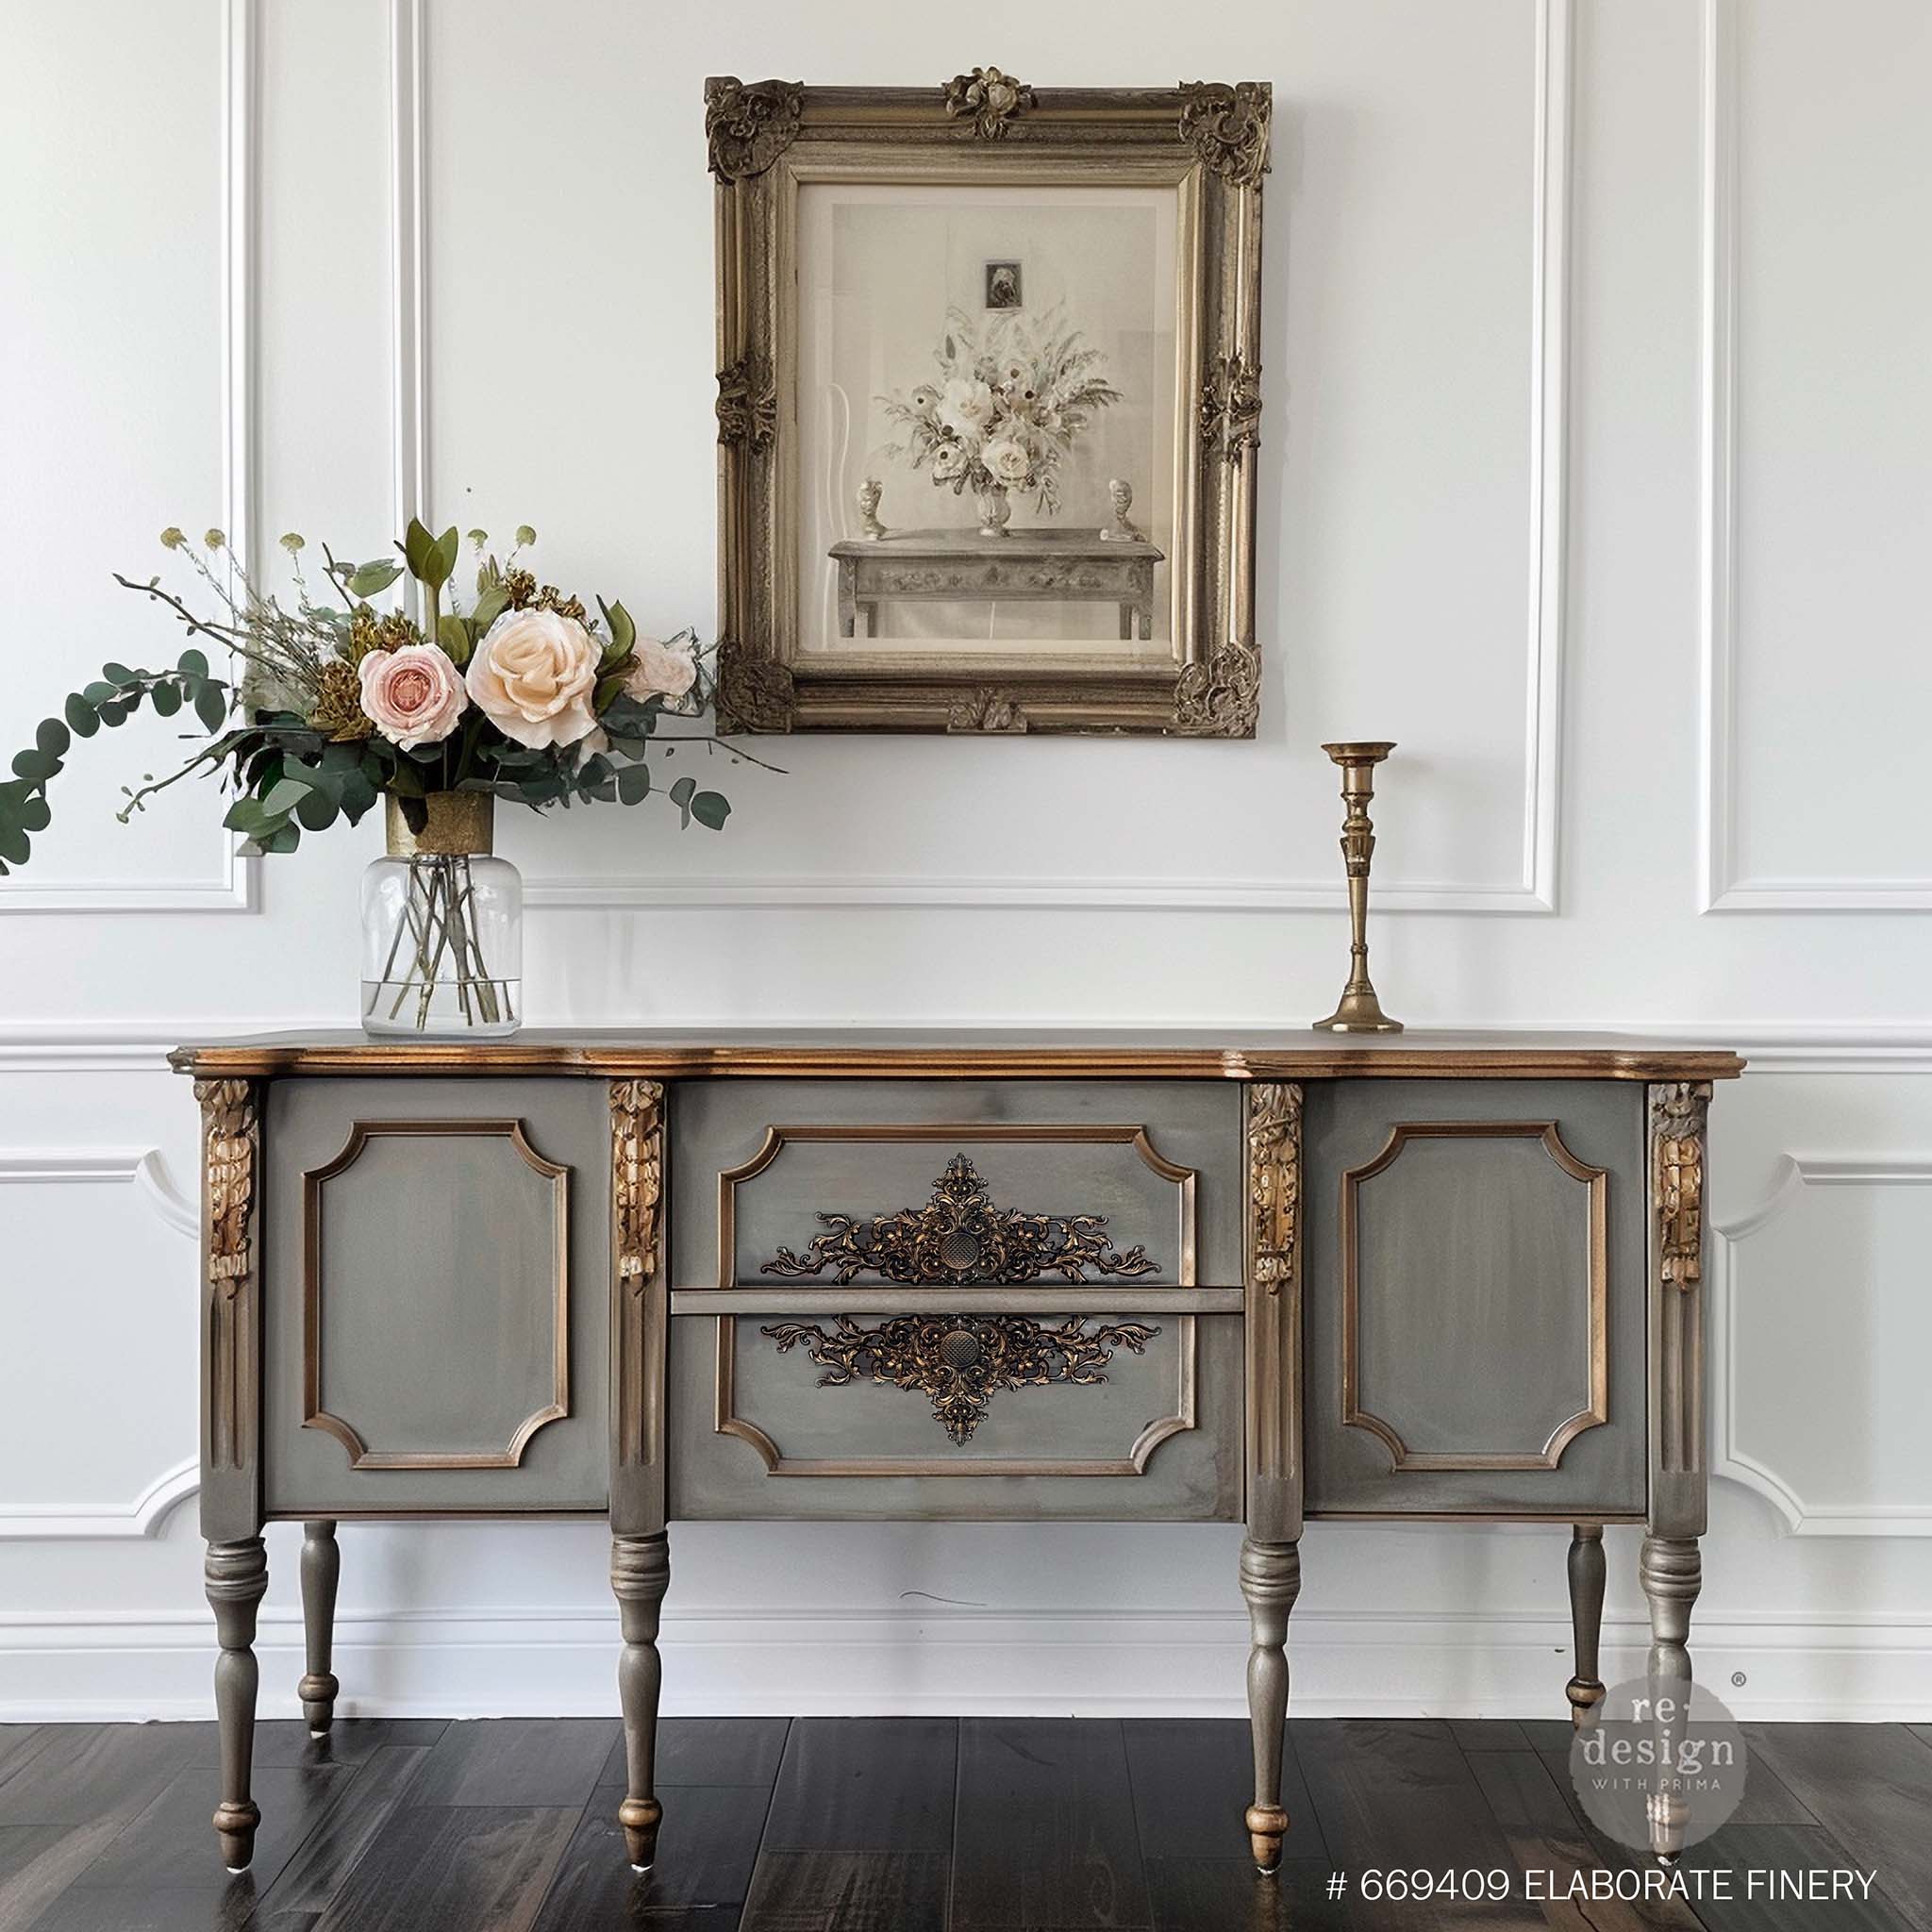 A vintage console table is painted gray with bronze accents and features ReDesign with Prima's Elaborate Finery Decor Poly Casting on 2 center drawers.